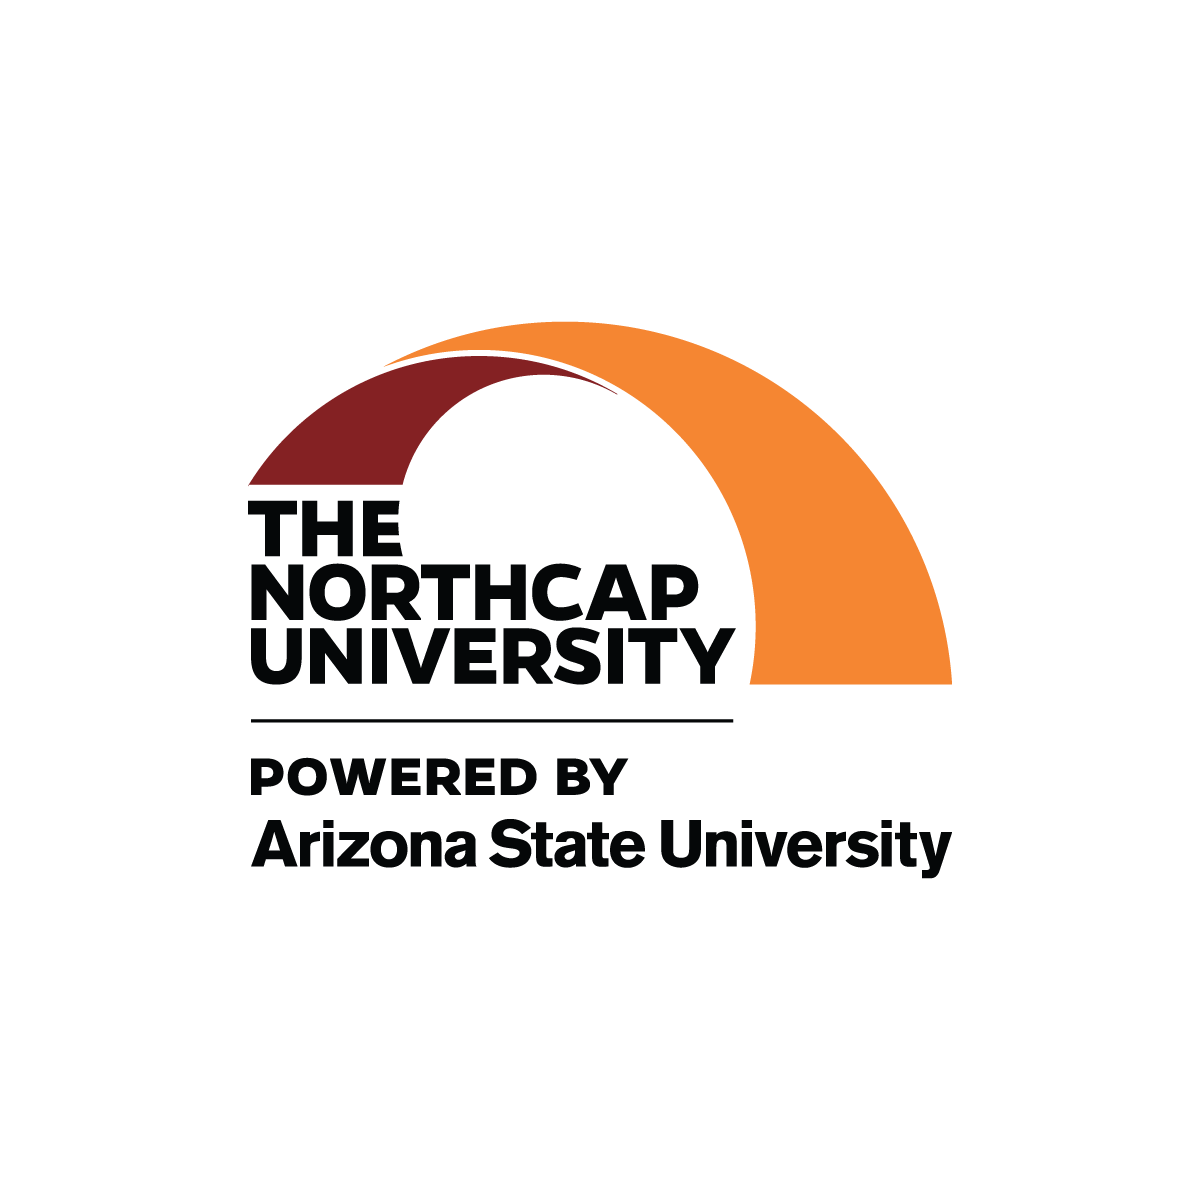 The NorthCapUniversityJoins 